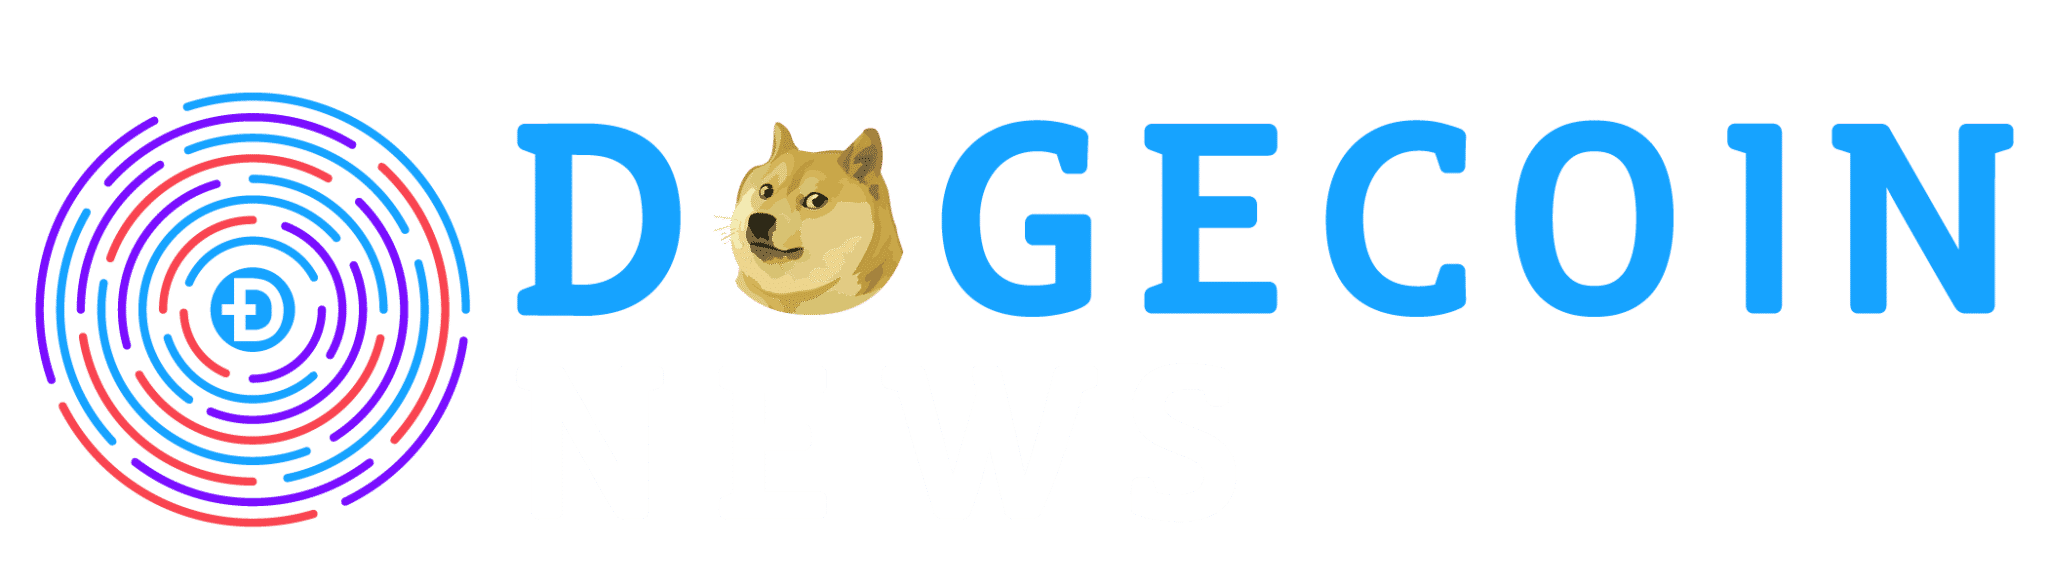 Dogecoin Price Chart Live